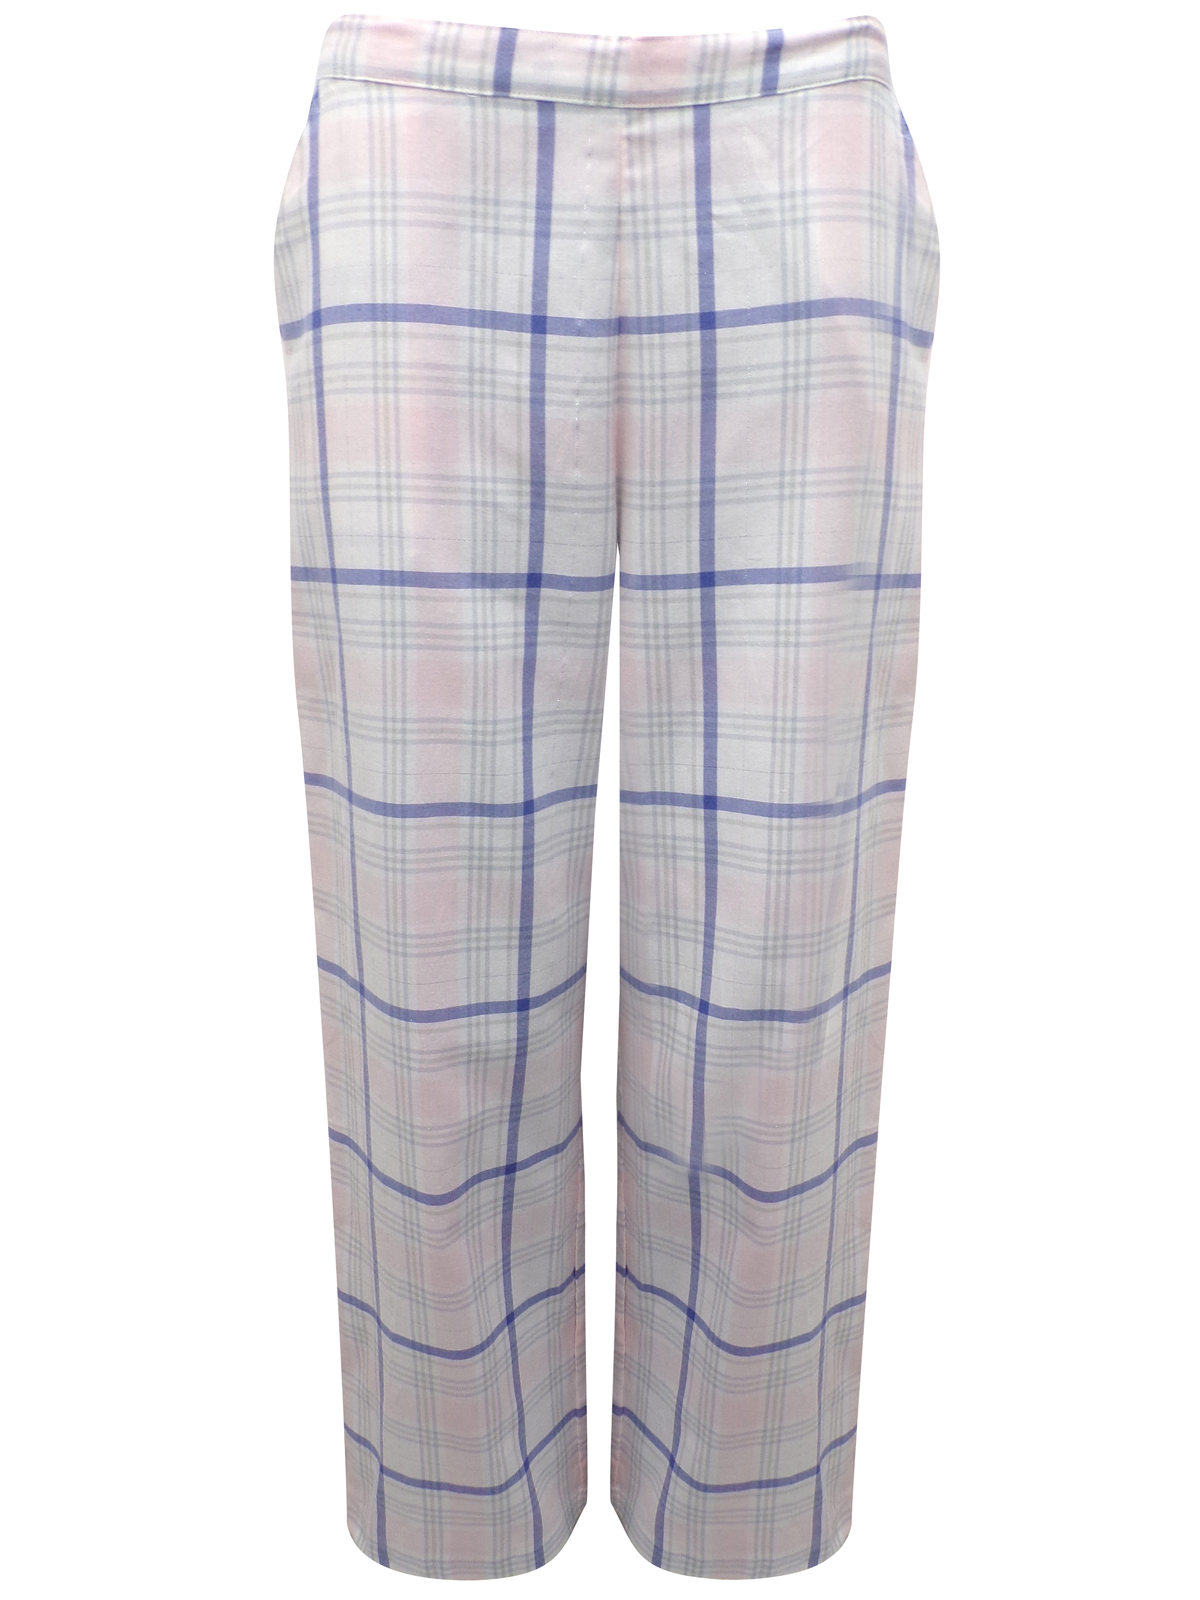 Marks and Spencer - - M&5 PINK Cotton Rich Checked Pyjama Bottoms ...